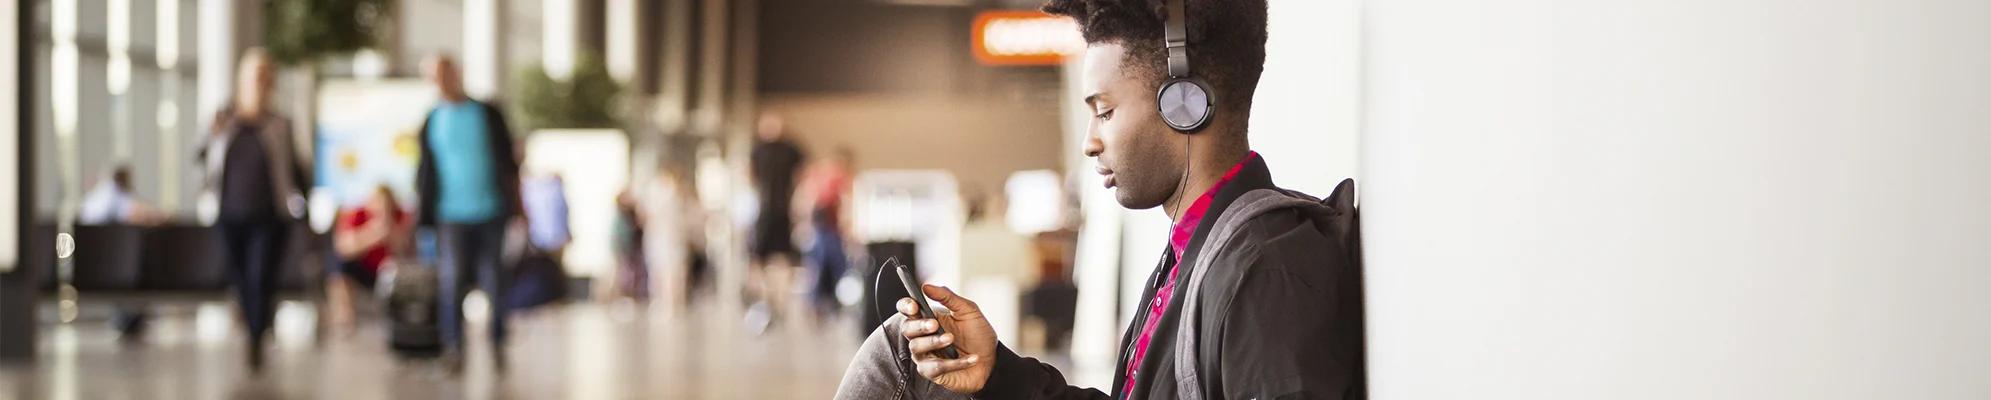 Young person with headphones on and looking at mobile phone